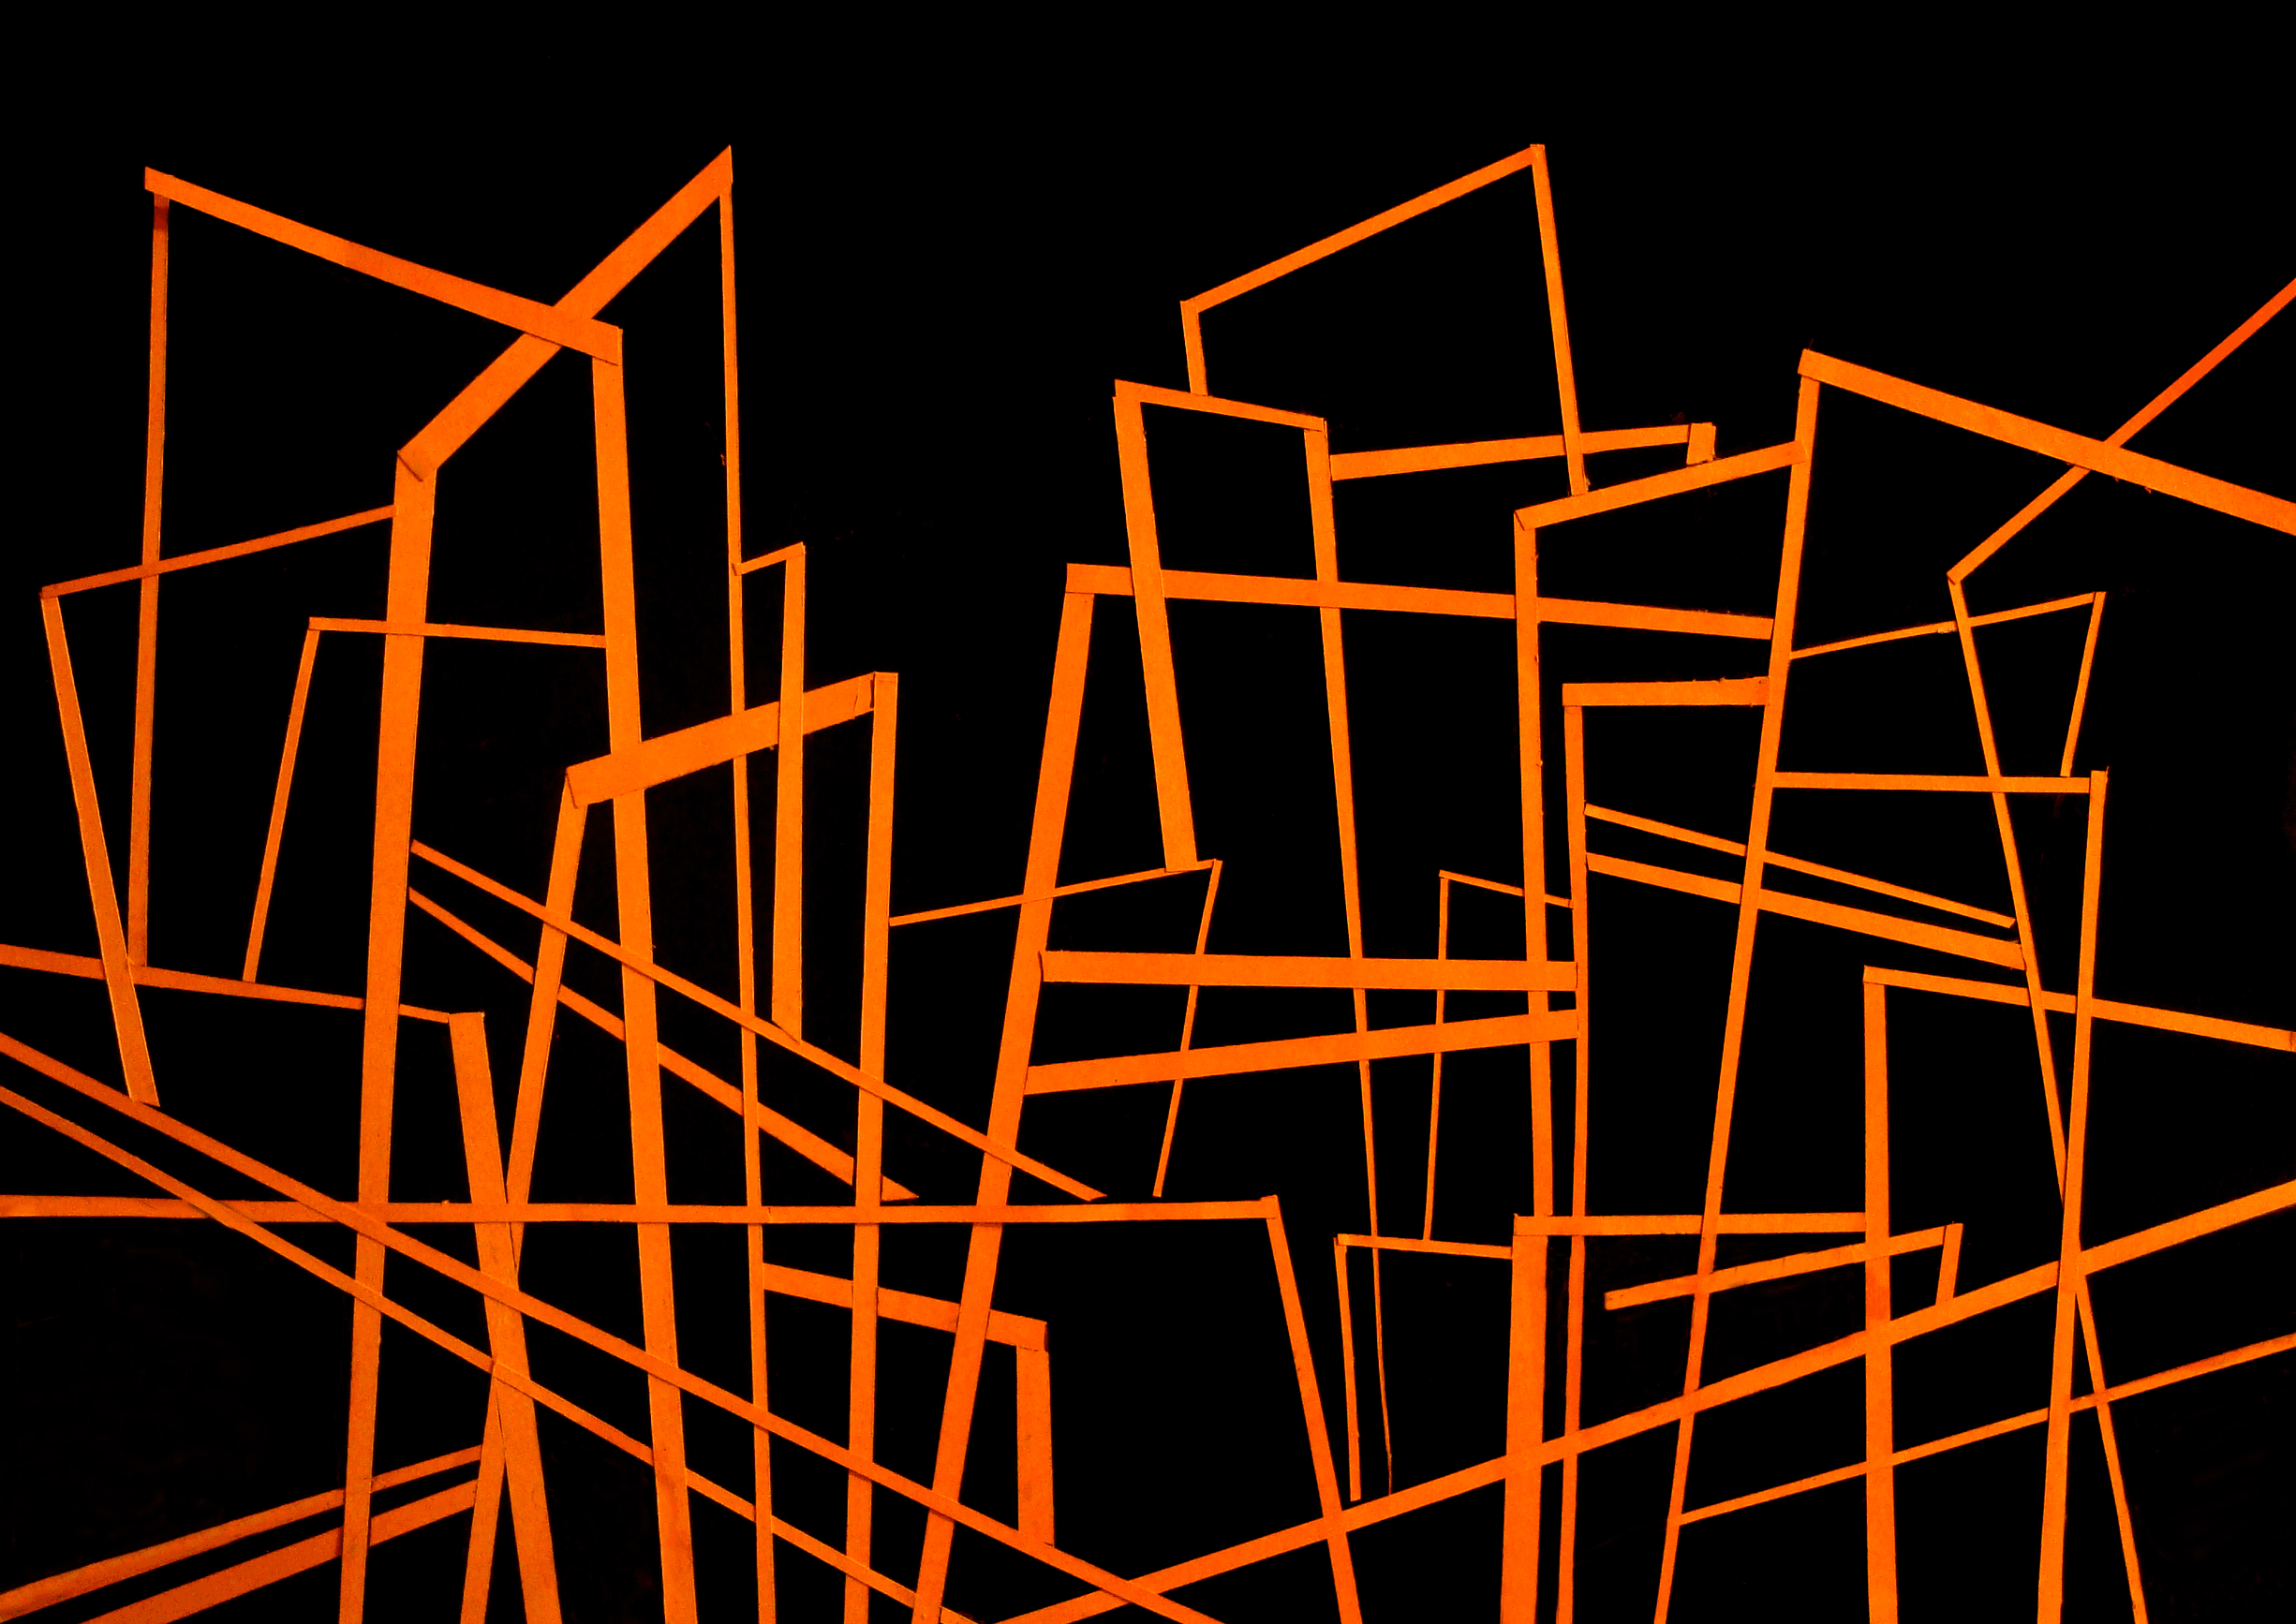 City Abstraction 02